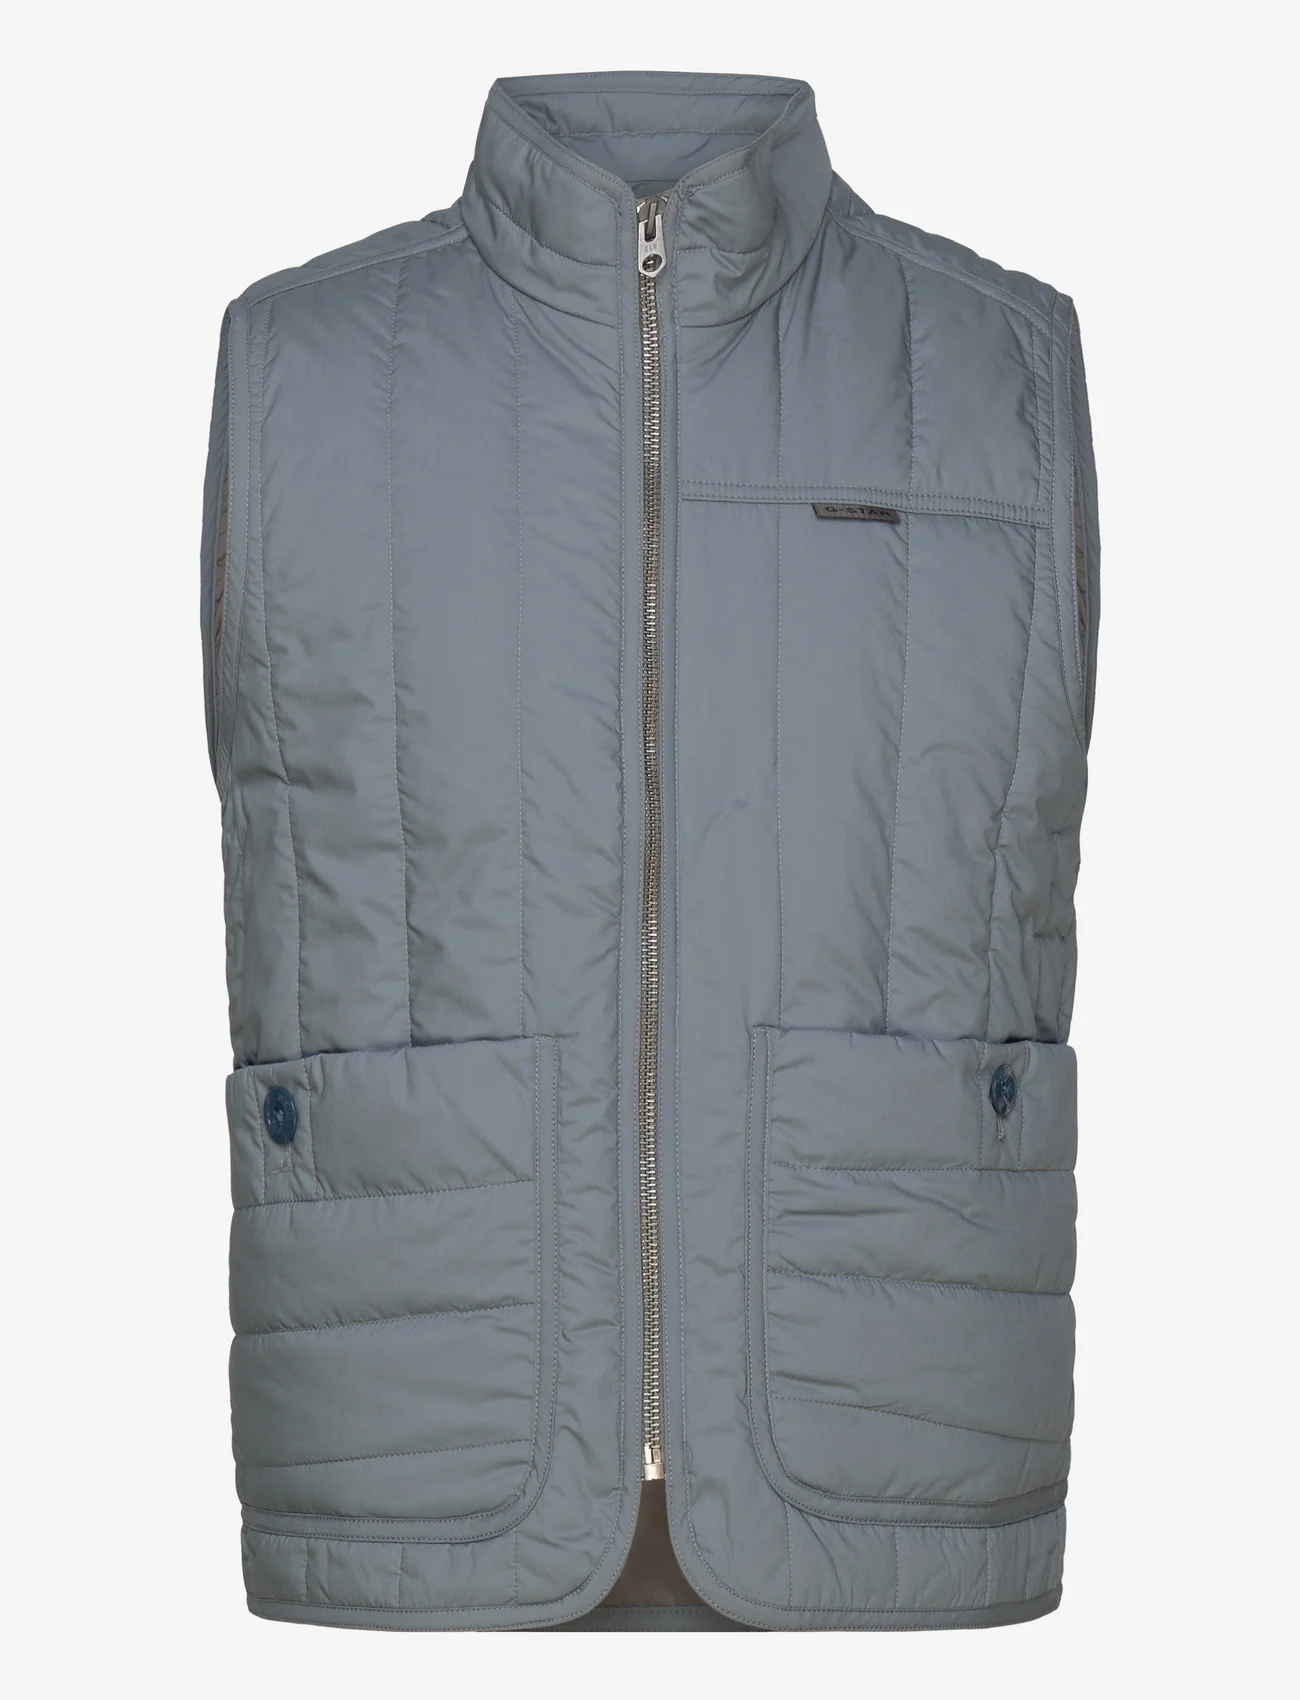 G-Star RAW - Liner vest - bodywarmers - axis - 0